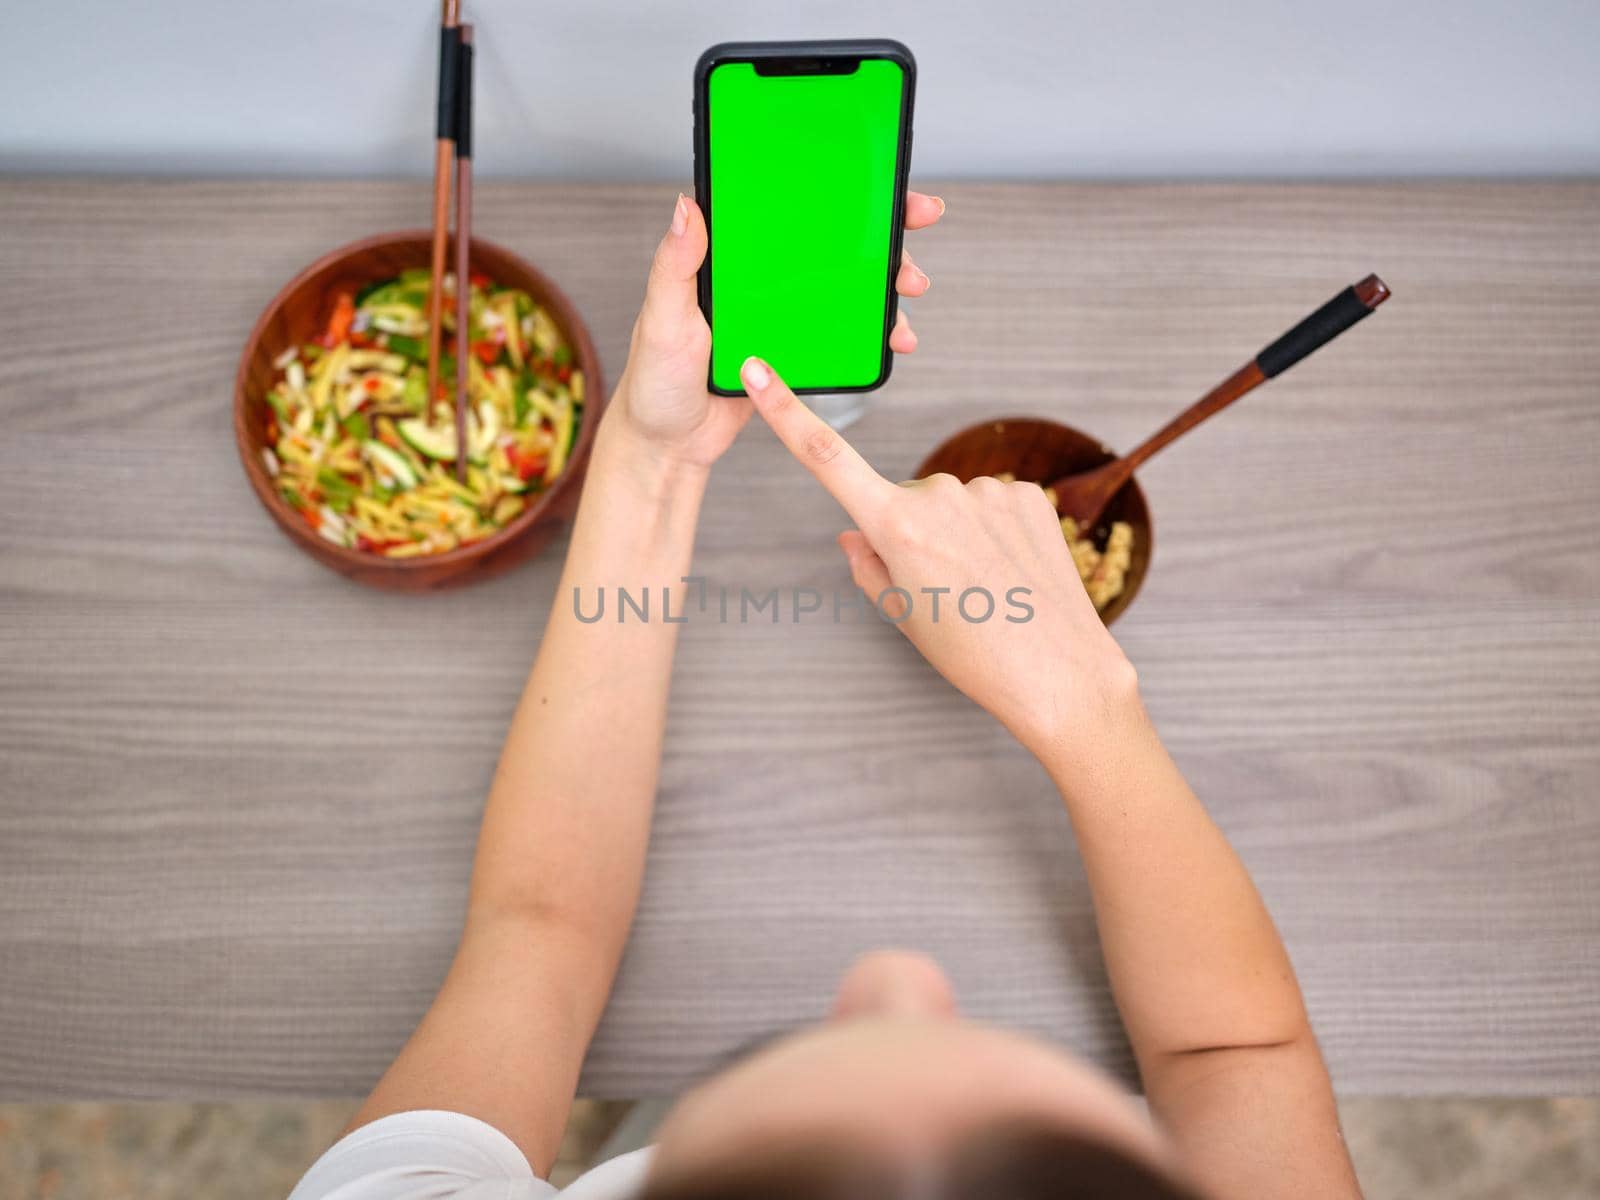 woman eating tabbouleh in a wooden bowl with chopsticks, looking at the green screen of her mobile phone, seen from above